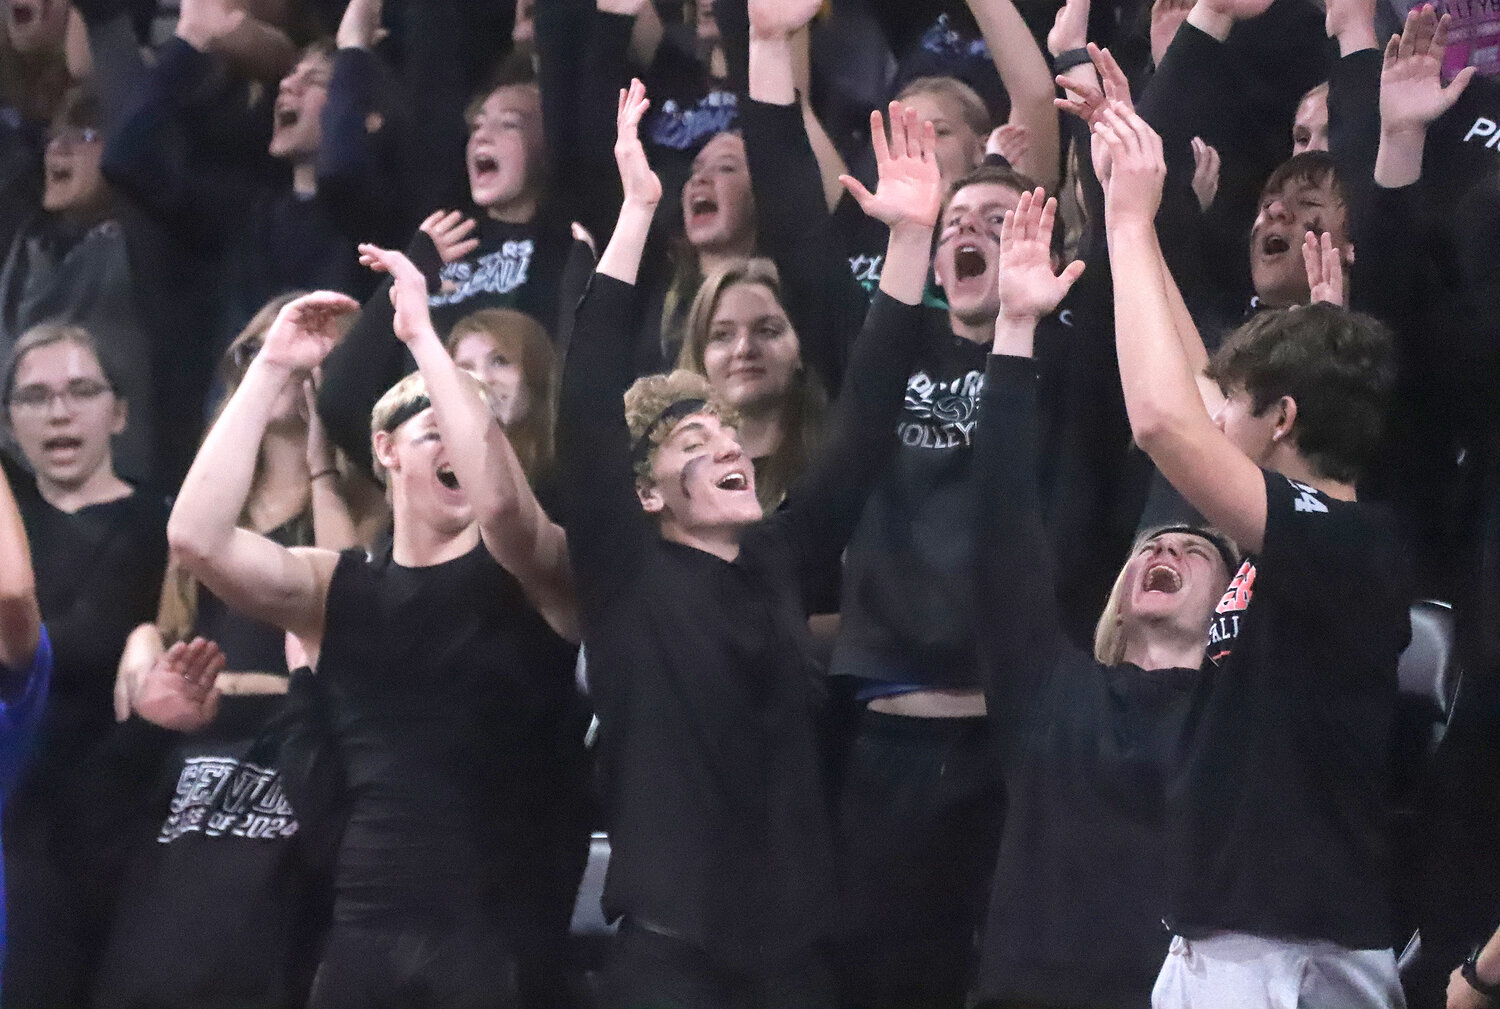 The HTC student section celebrates a point from the corner of the Xtreme Arena Wednesday as the Crusaders rolled to a 3-set win over the Boyden-Hull Comets and advanced to the Class 1A state championship match with Ankeny Christian Thursday at 7 p.m.